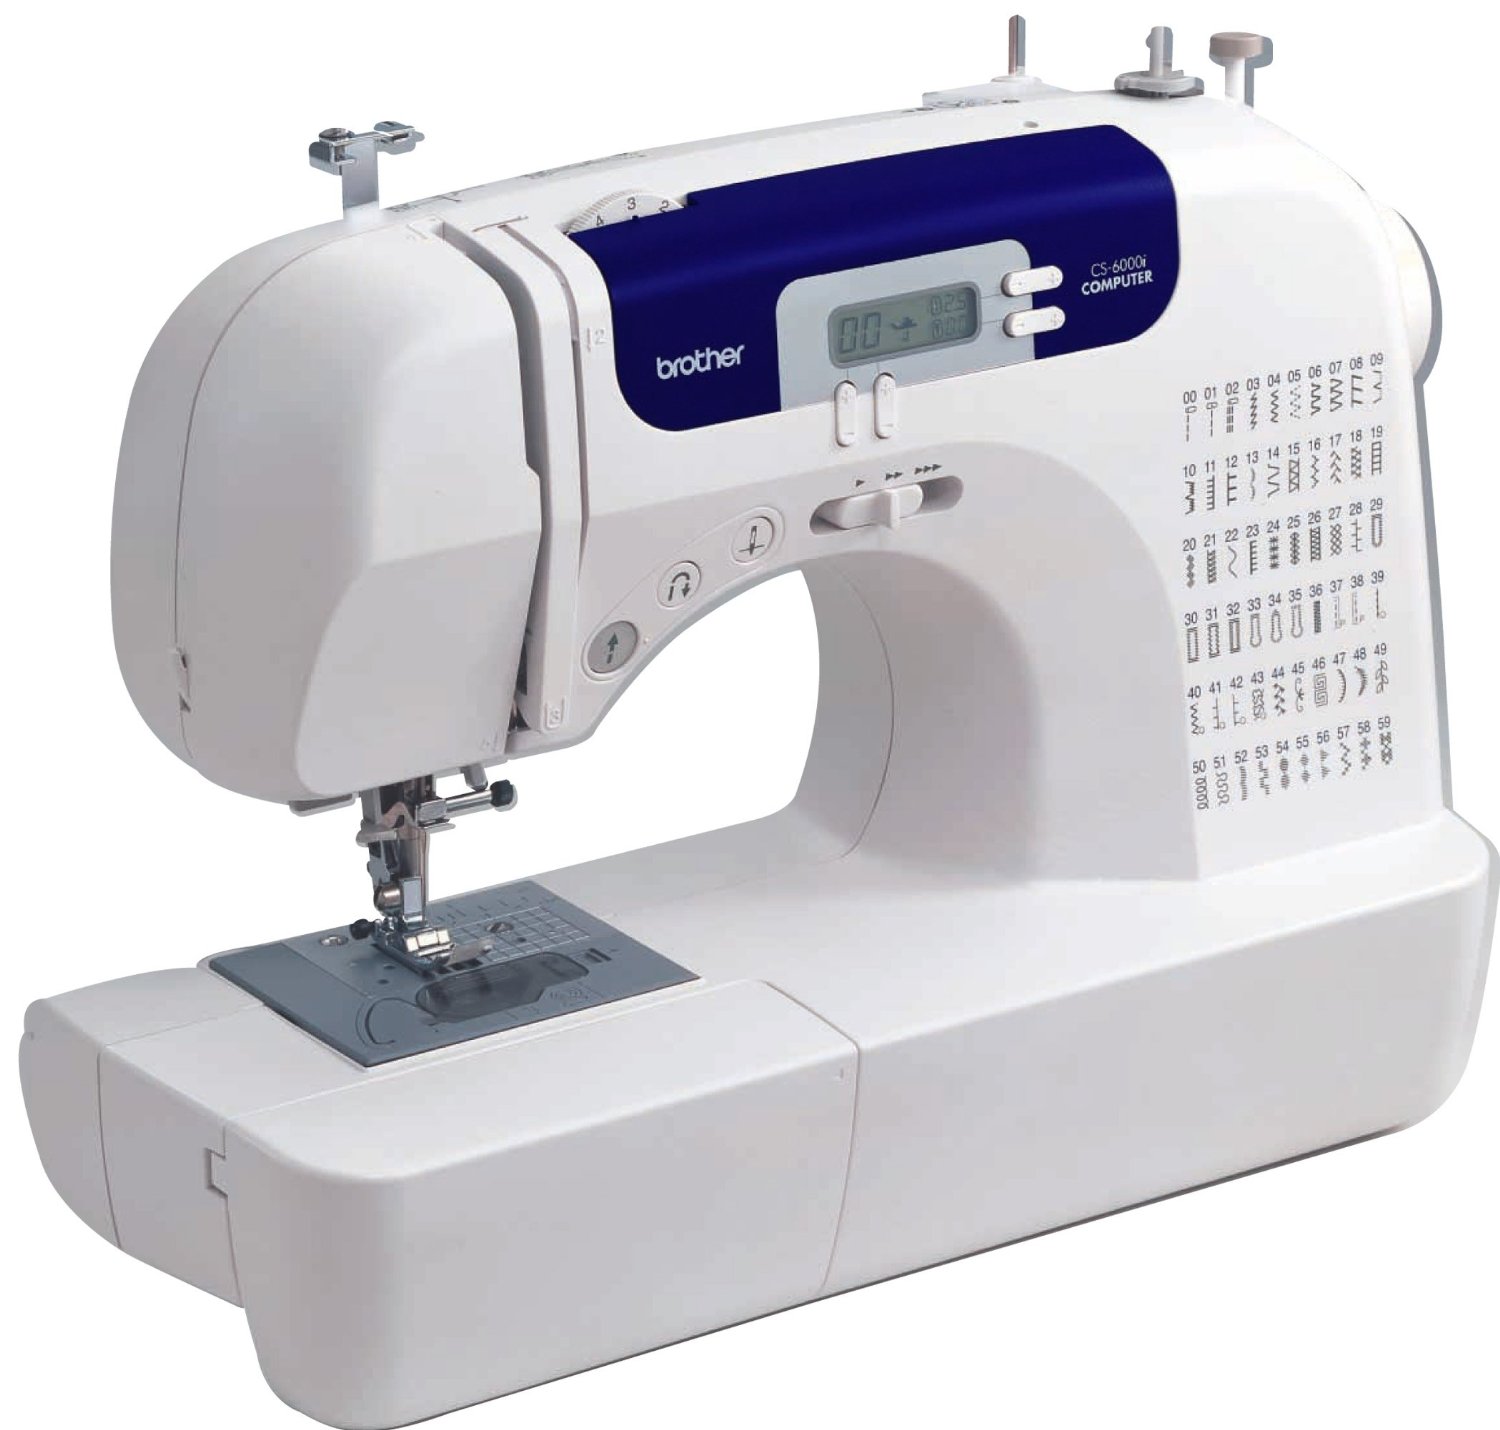 Brother Feature-Rich Sewing Machine with 60 Stitches Only $114.99!